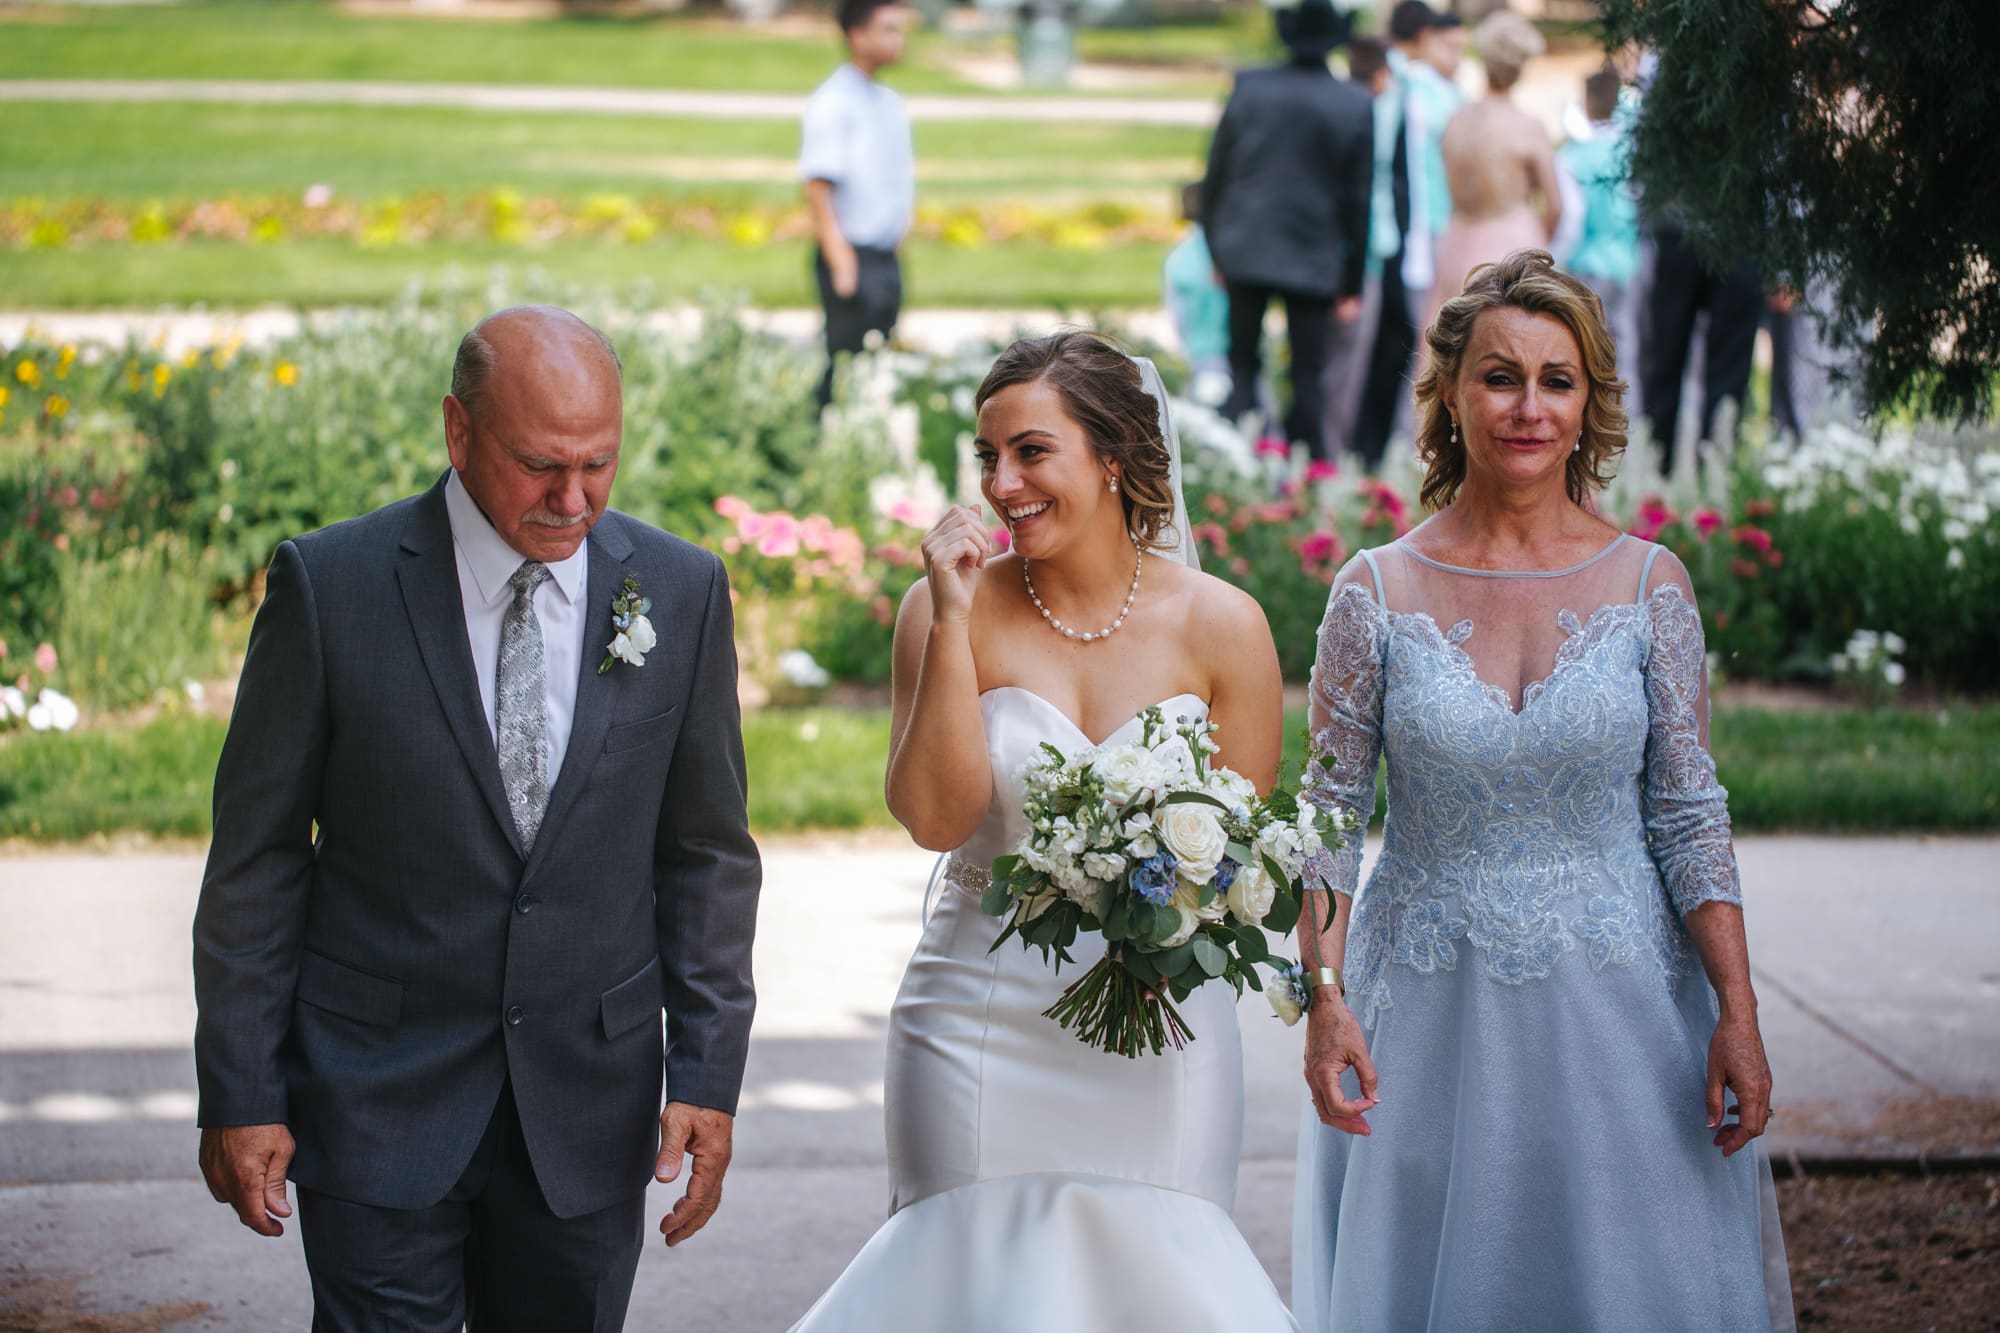 bride with parents, bride with dad before walking down aisle, dad crying with bride, mom crying with bride, bride with parents on wedding day, Cheeseman Park wedding, outdoor wedding ceremony, white wedding flowers, light blue mother of bride dress